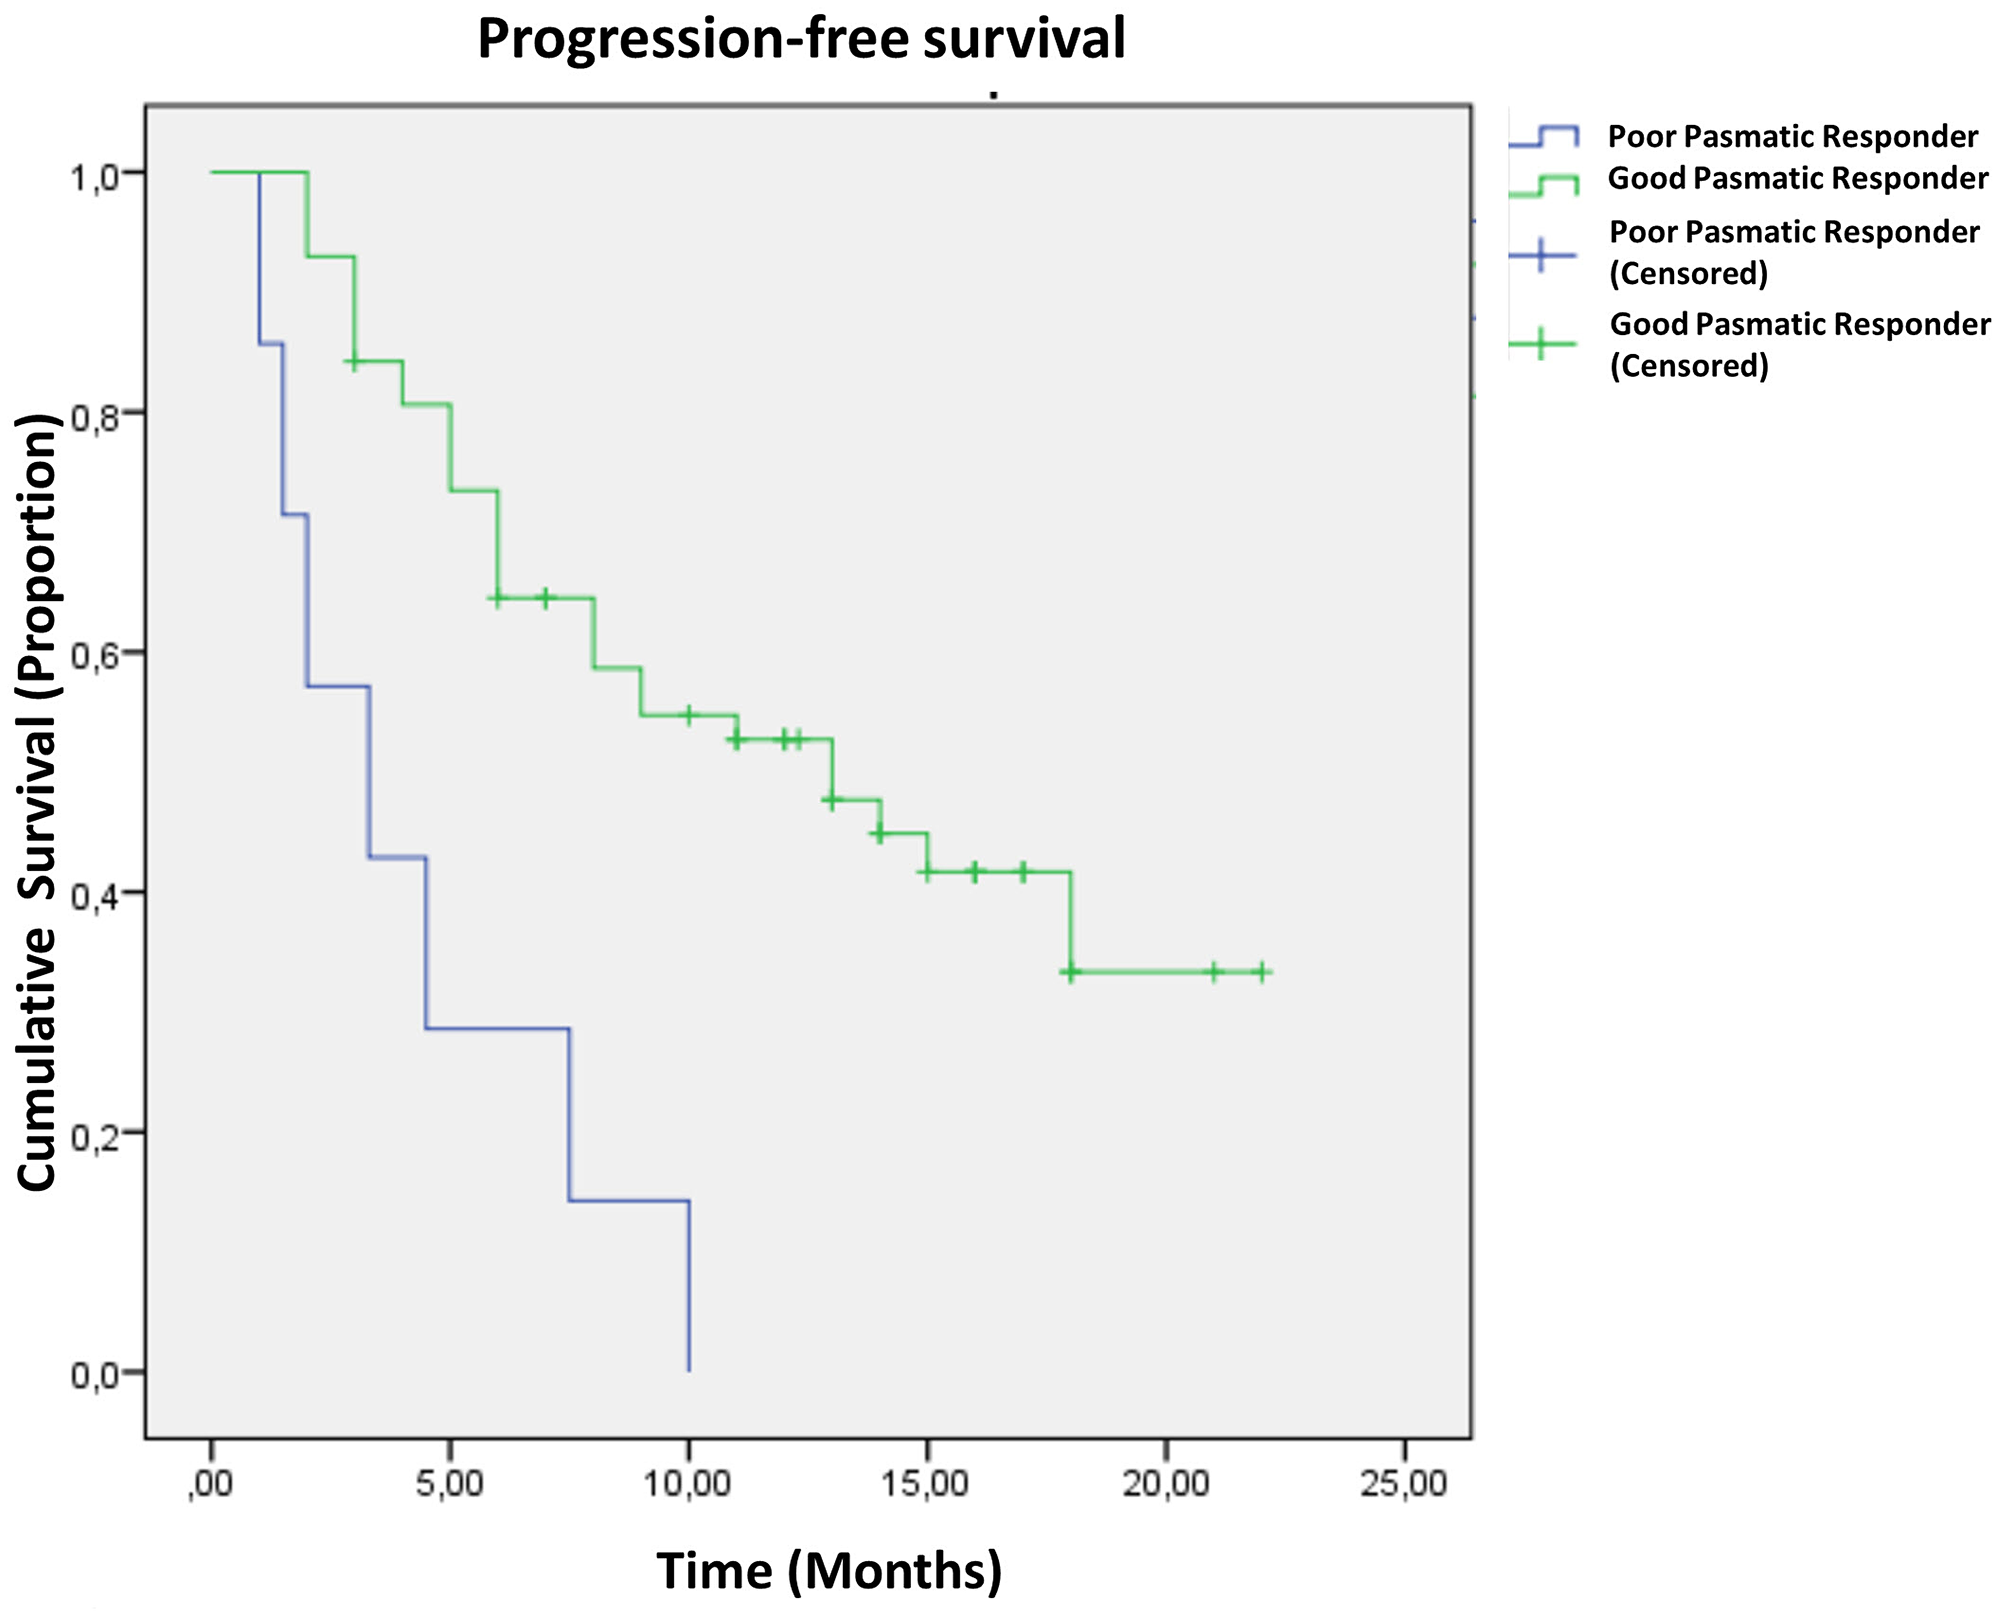 Progression-free survival curves in 64 patients with non-small cell lung carcinoma based on the plasmatic response to osimertinib treatment.